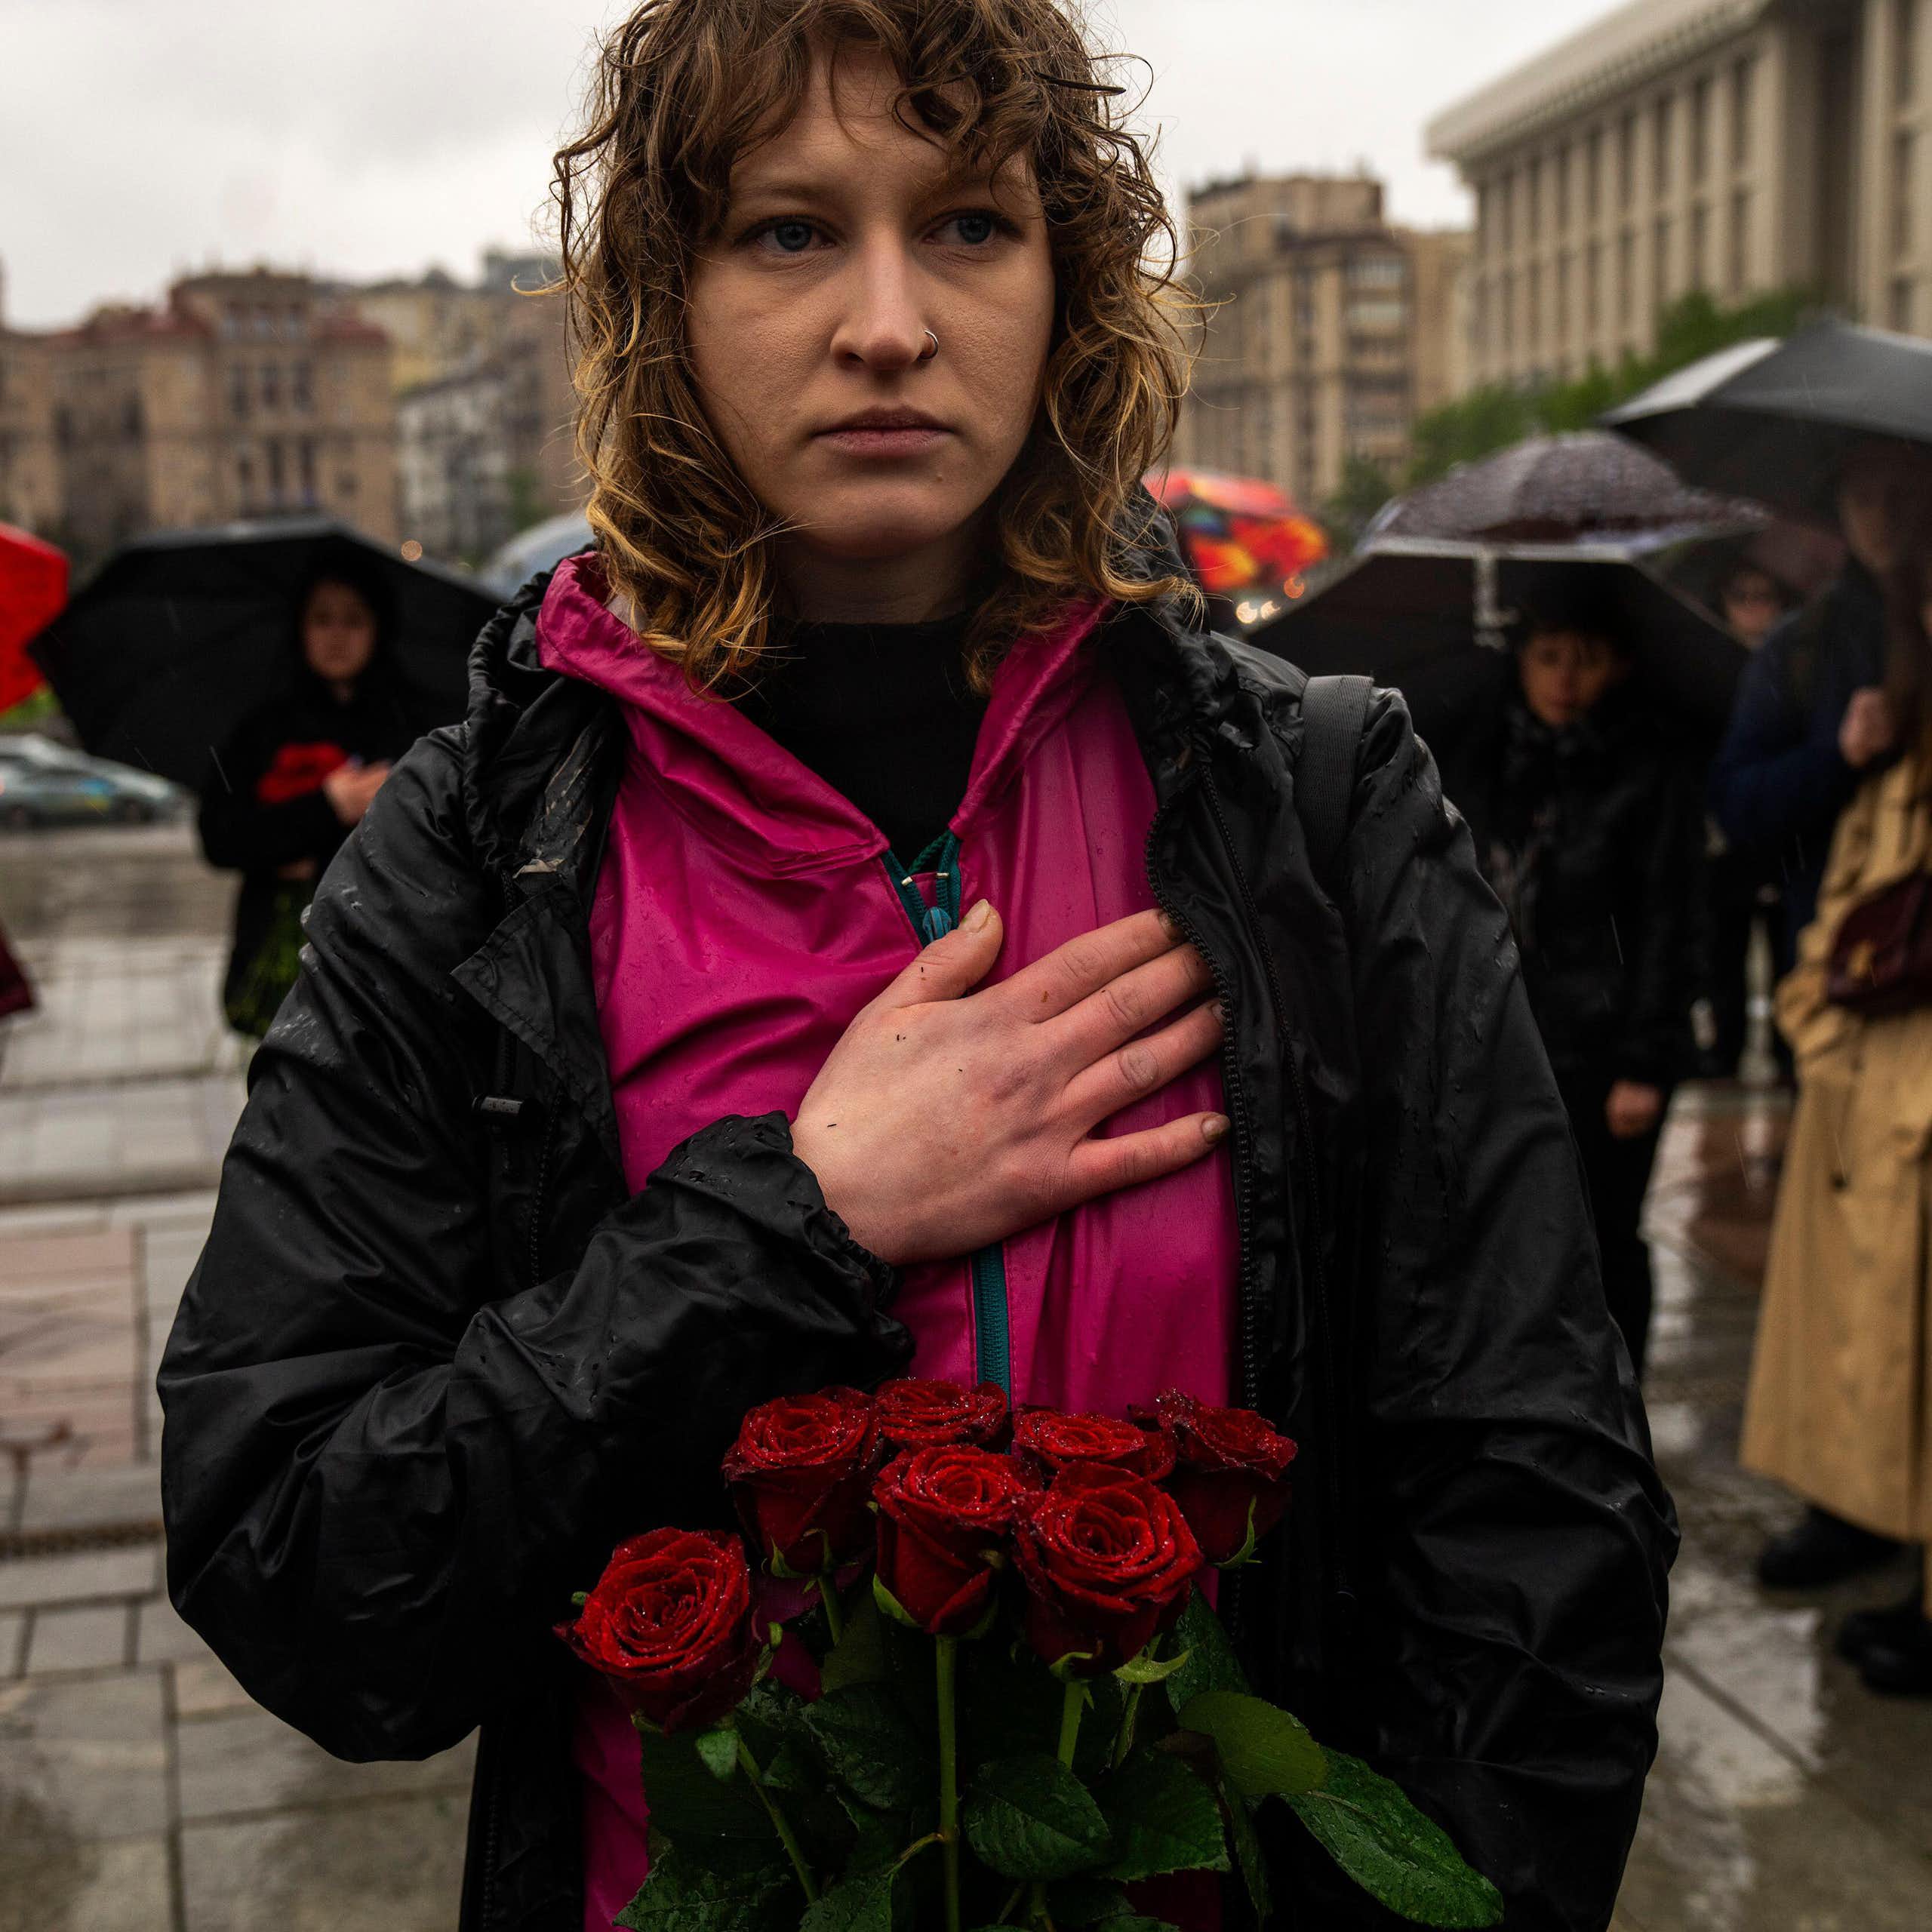 A yong woman stands in the rain at a funeral in KHarkiv, Ukraine, with her hand on her heart.